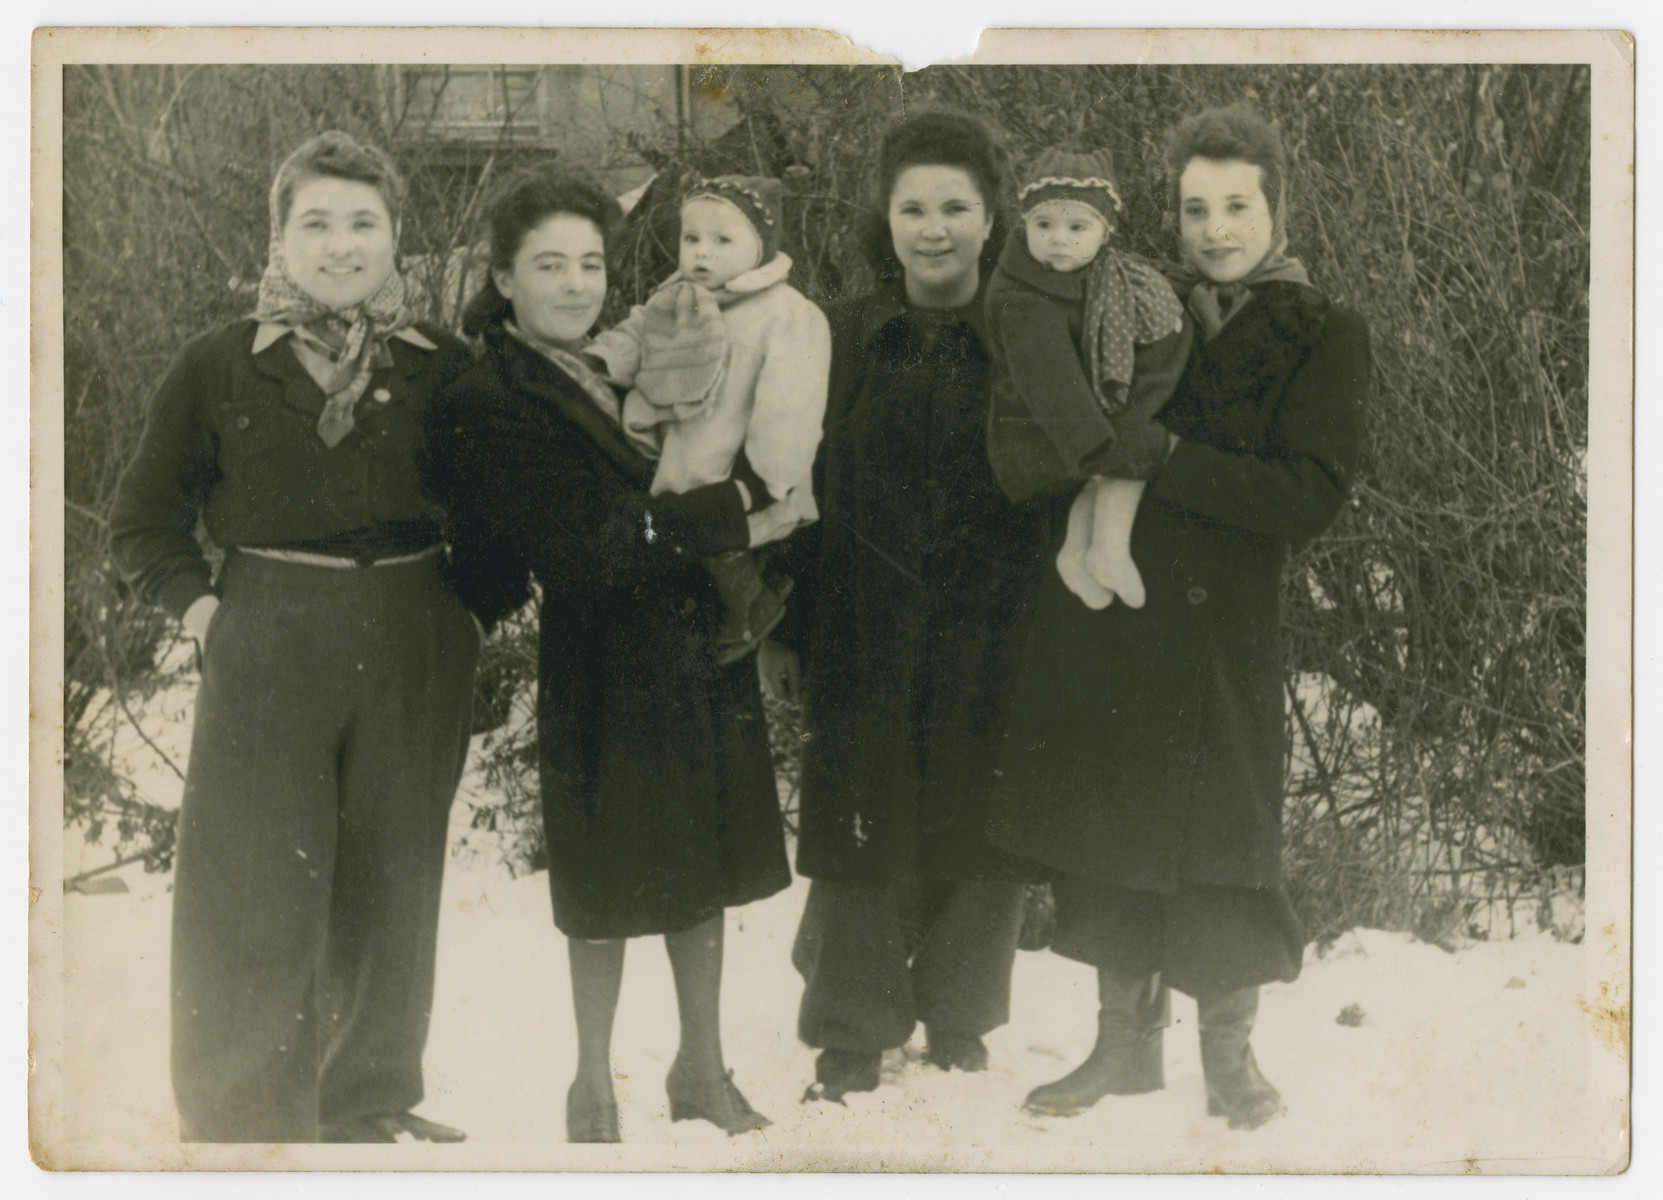 Group portrait of women, two of whom are holding their babies in the Eschwege displaced persons camp.

Pola Dichter, holding her daughter Klara, is second from the left.